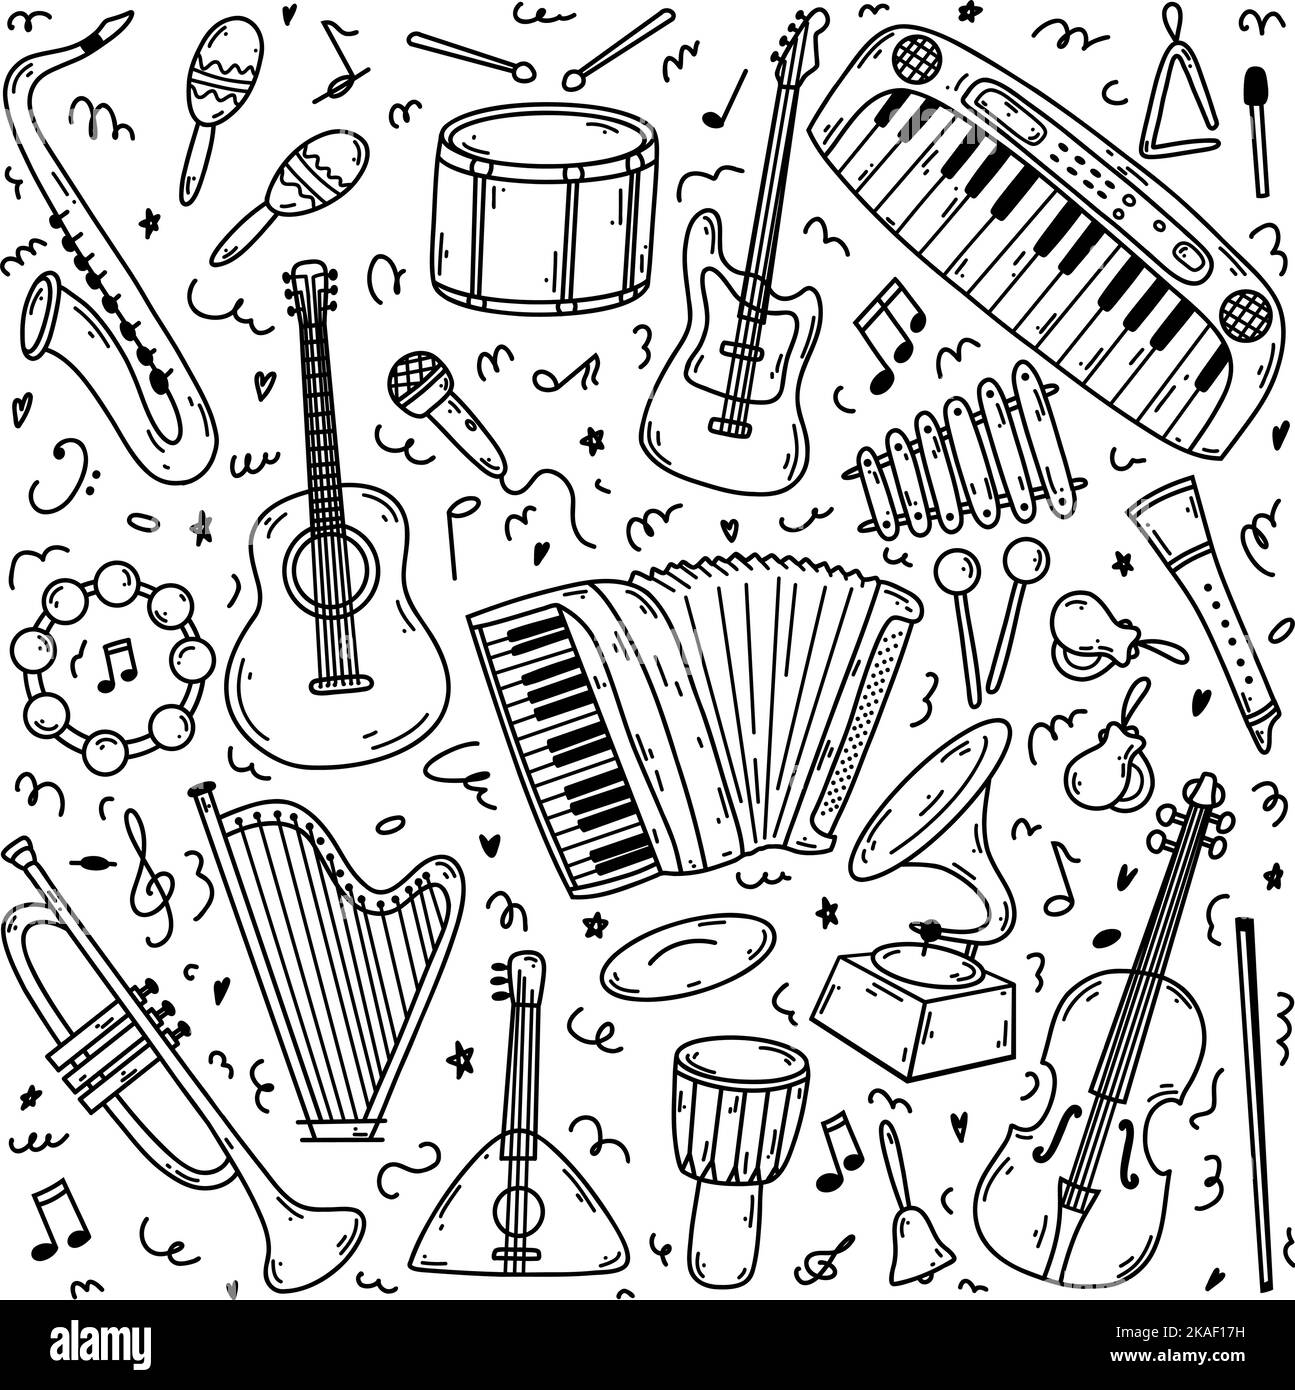 Hand drawn doodle musical instruments. Vector sketch illustration set, black outline art collection for web design, icon, print, coloring page. Stock Vector